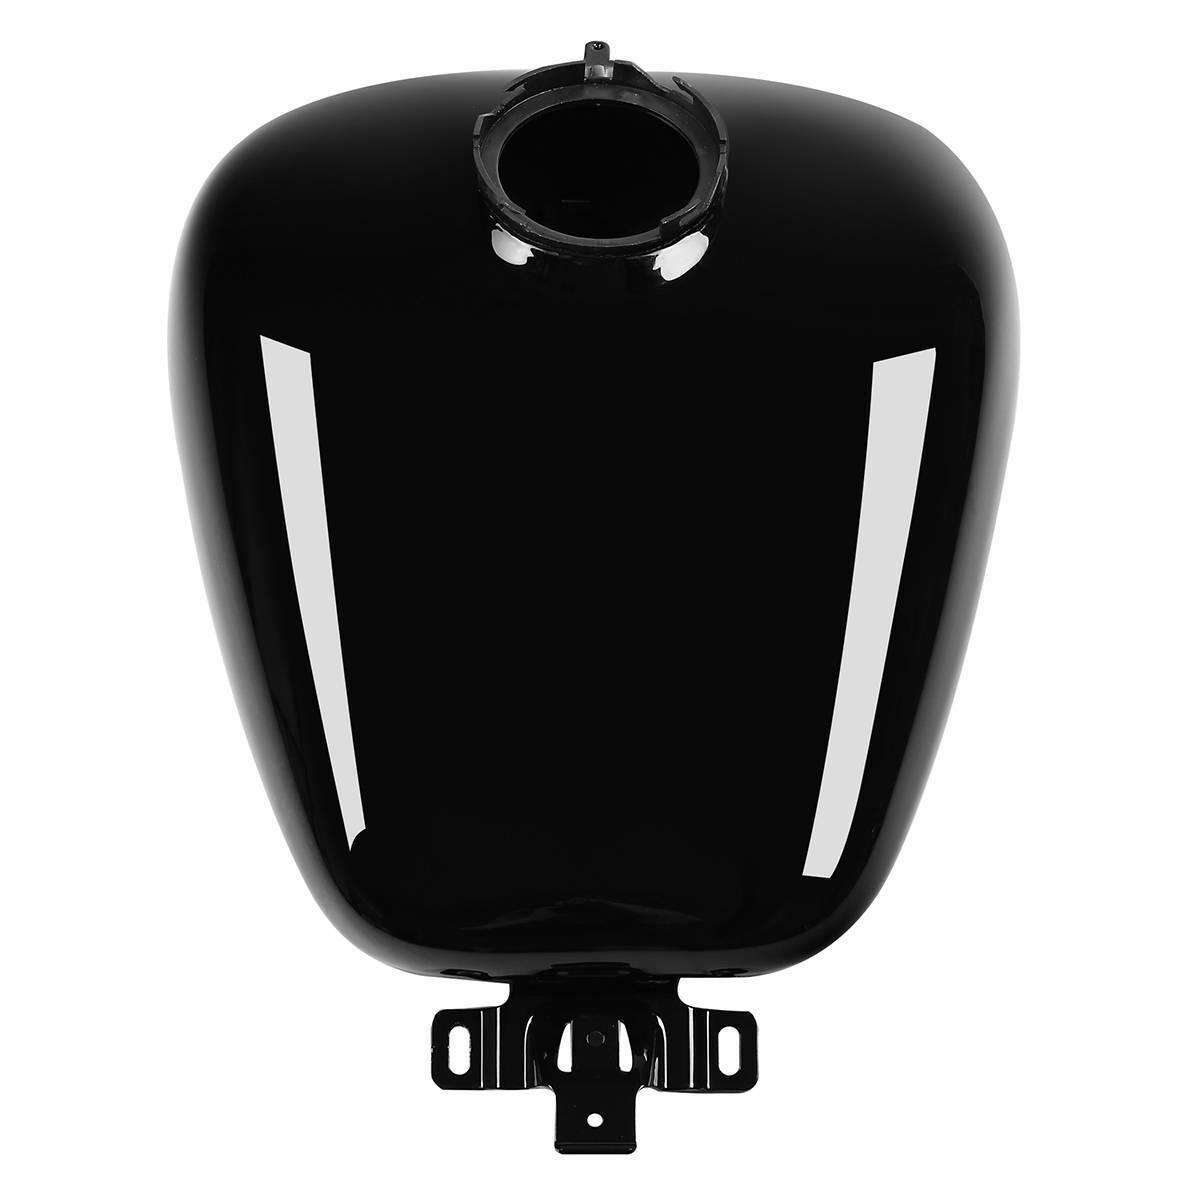 Painted 6 gallon Fuel Gas Tank Fit For Harley Touring Electra Street Glide 08-21 - Moto Life Products